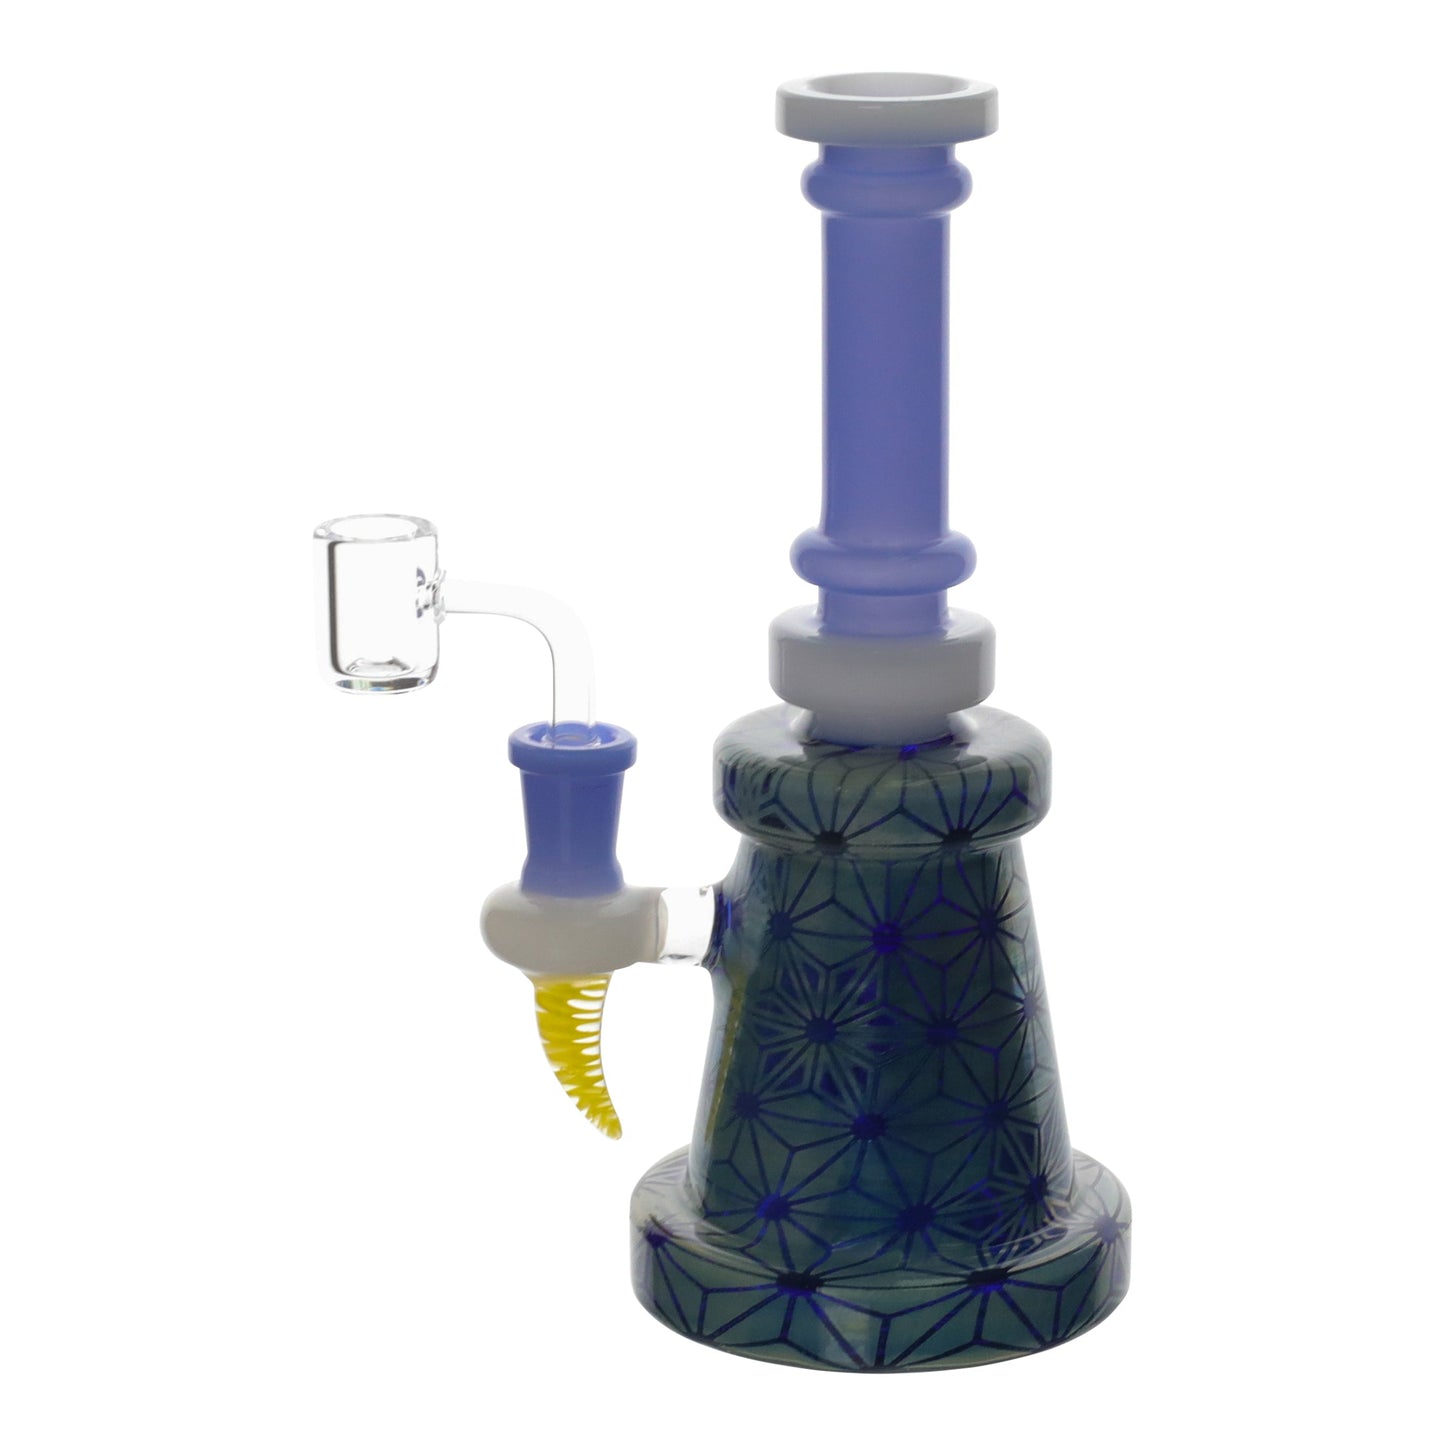 The Hieroglyphic Bong - 11in